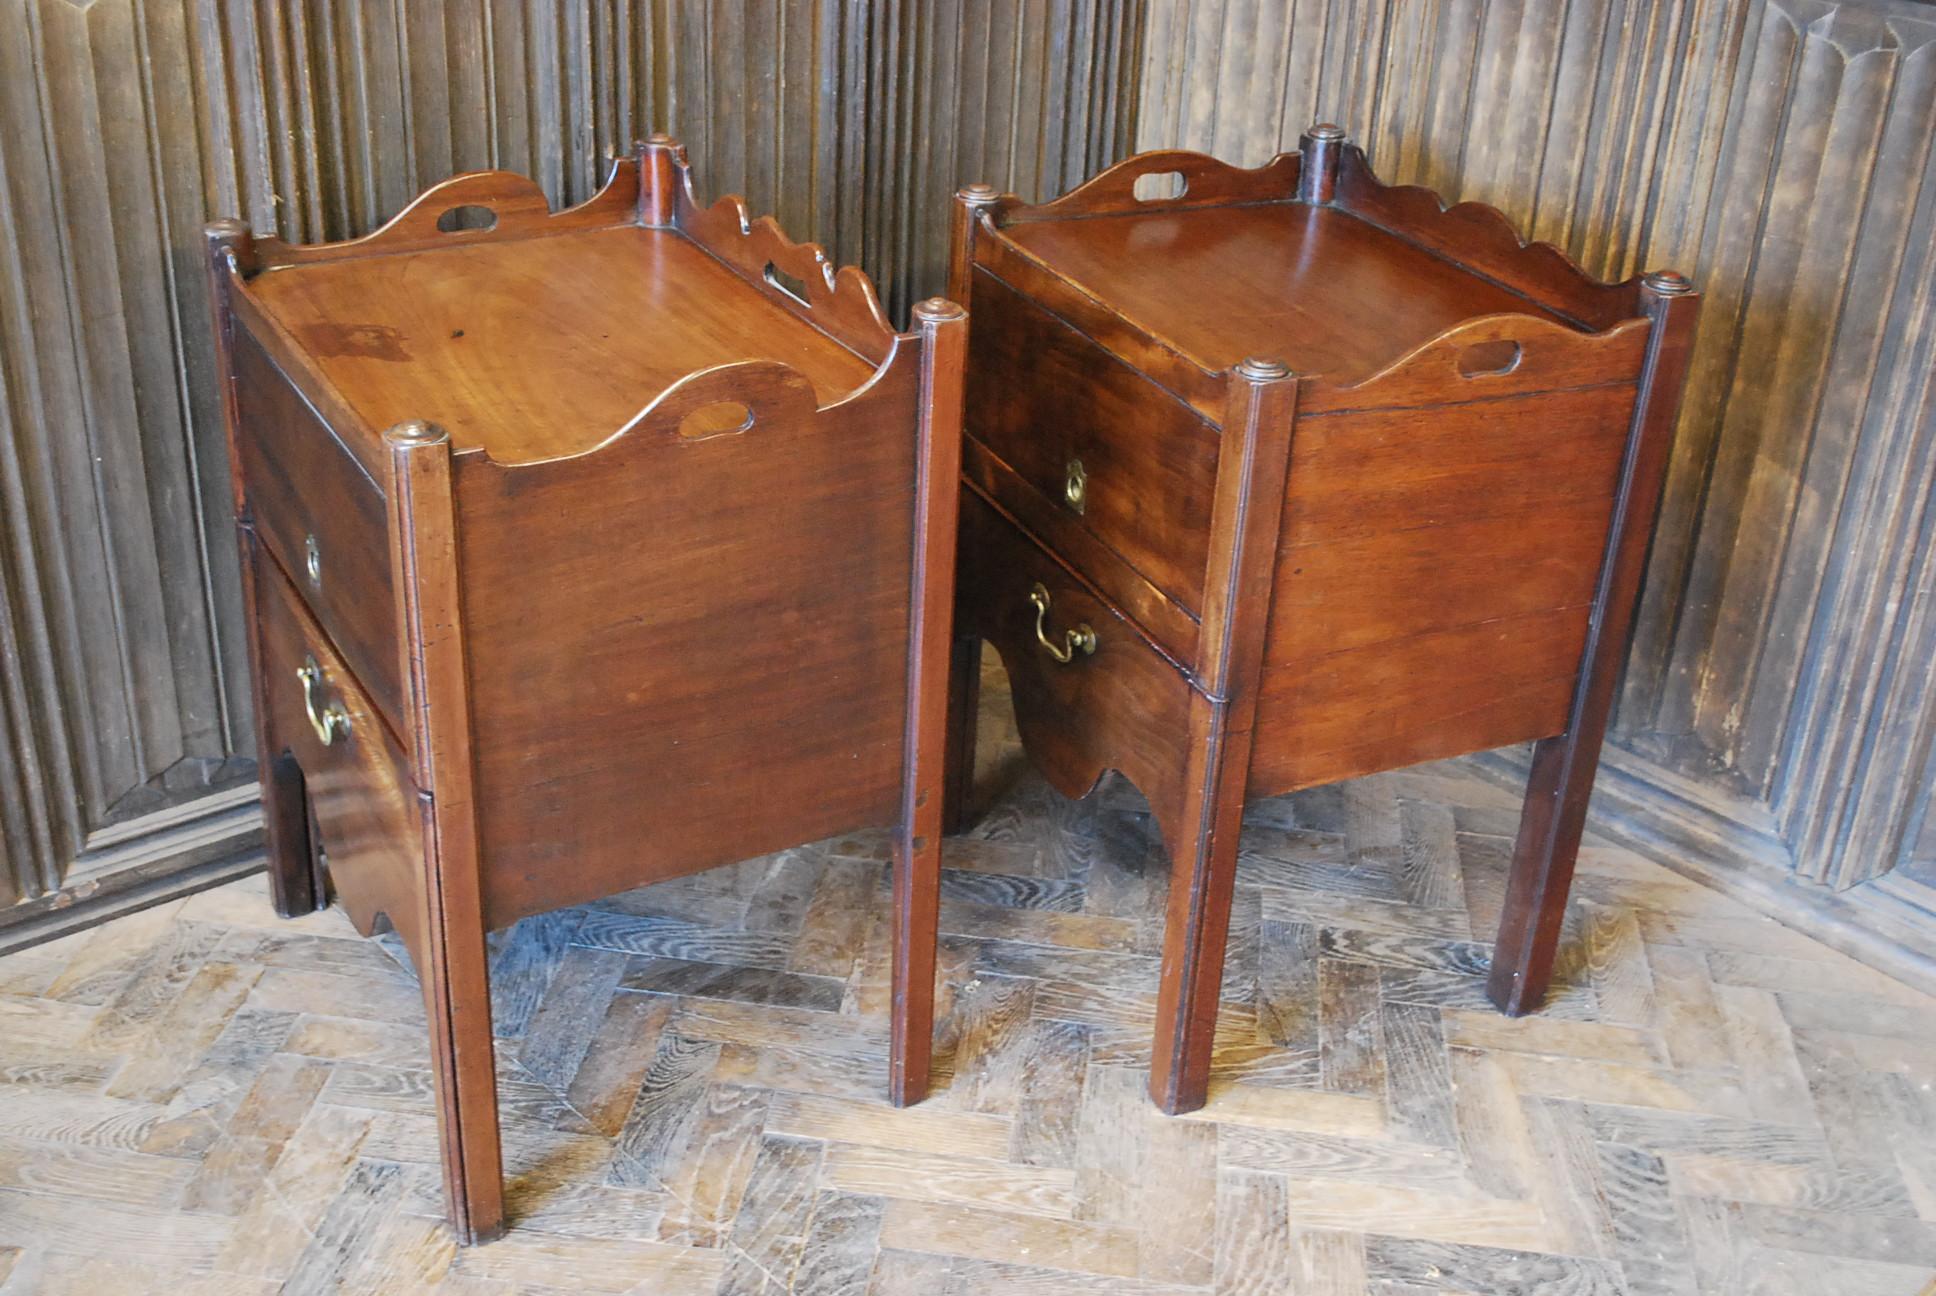 Hutton-Clarke antiques are pleased to offer a matched pair of Georgian tray-top commodes, circa 1780. Lift up sliding doors and converted bases with tooled leather inserts. A rare pair to find being English.